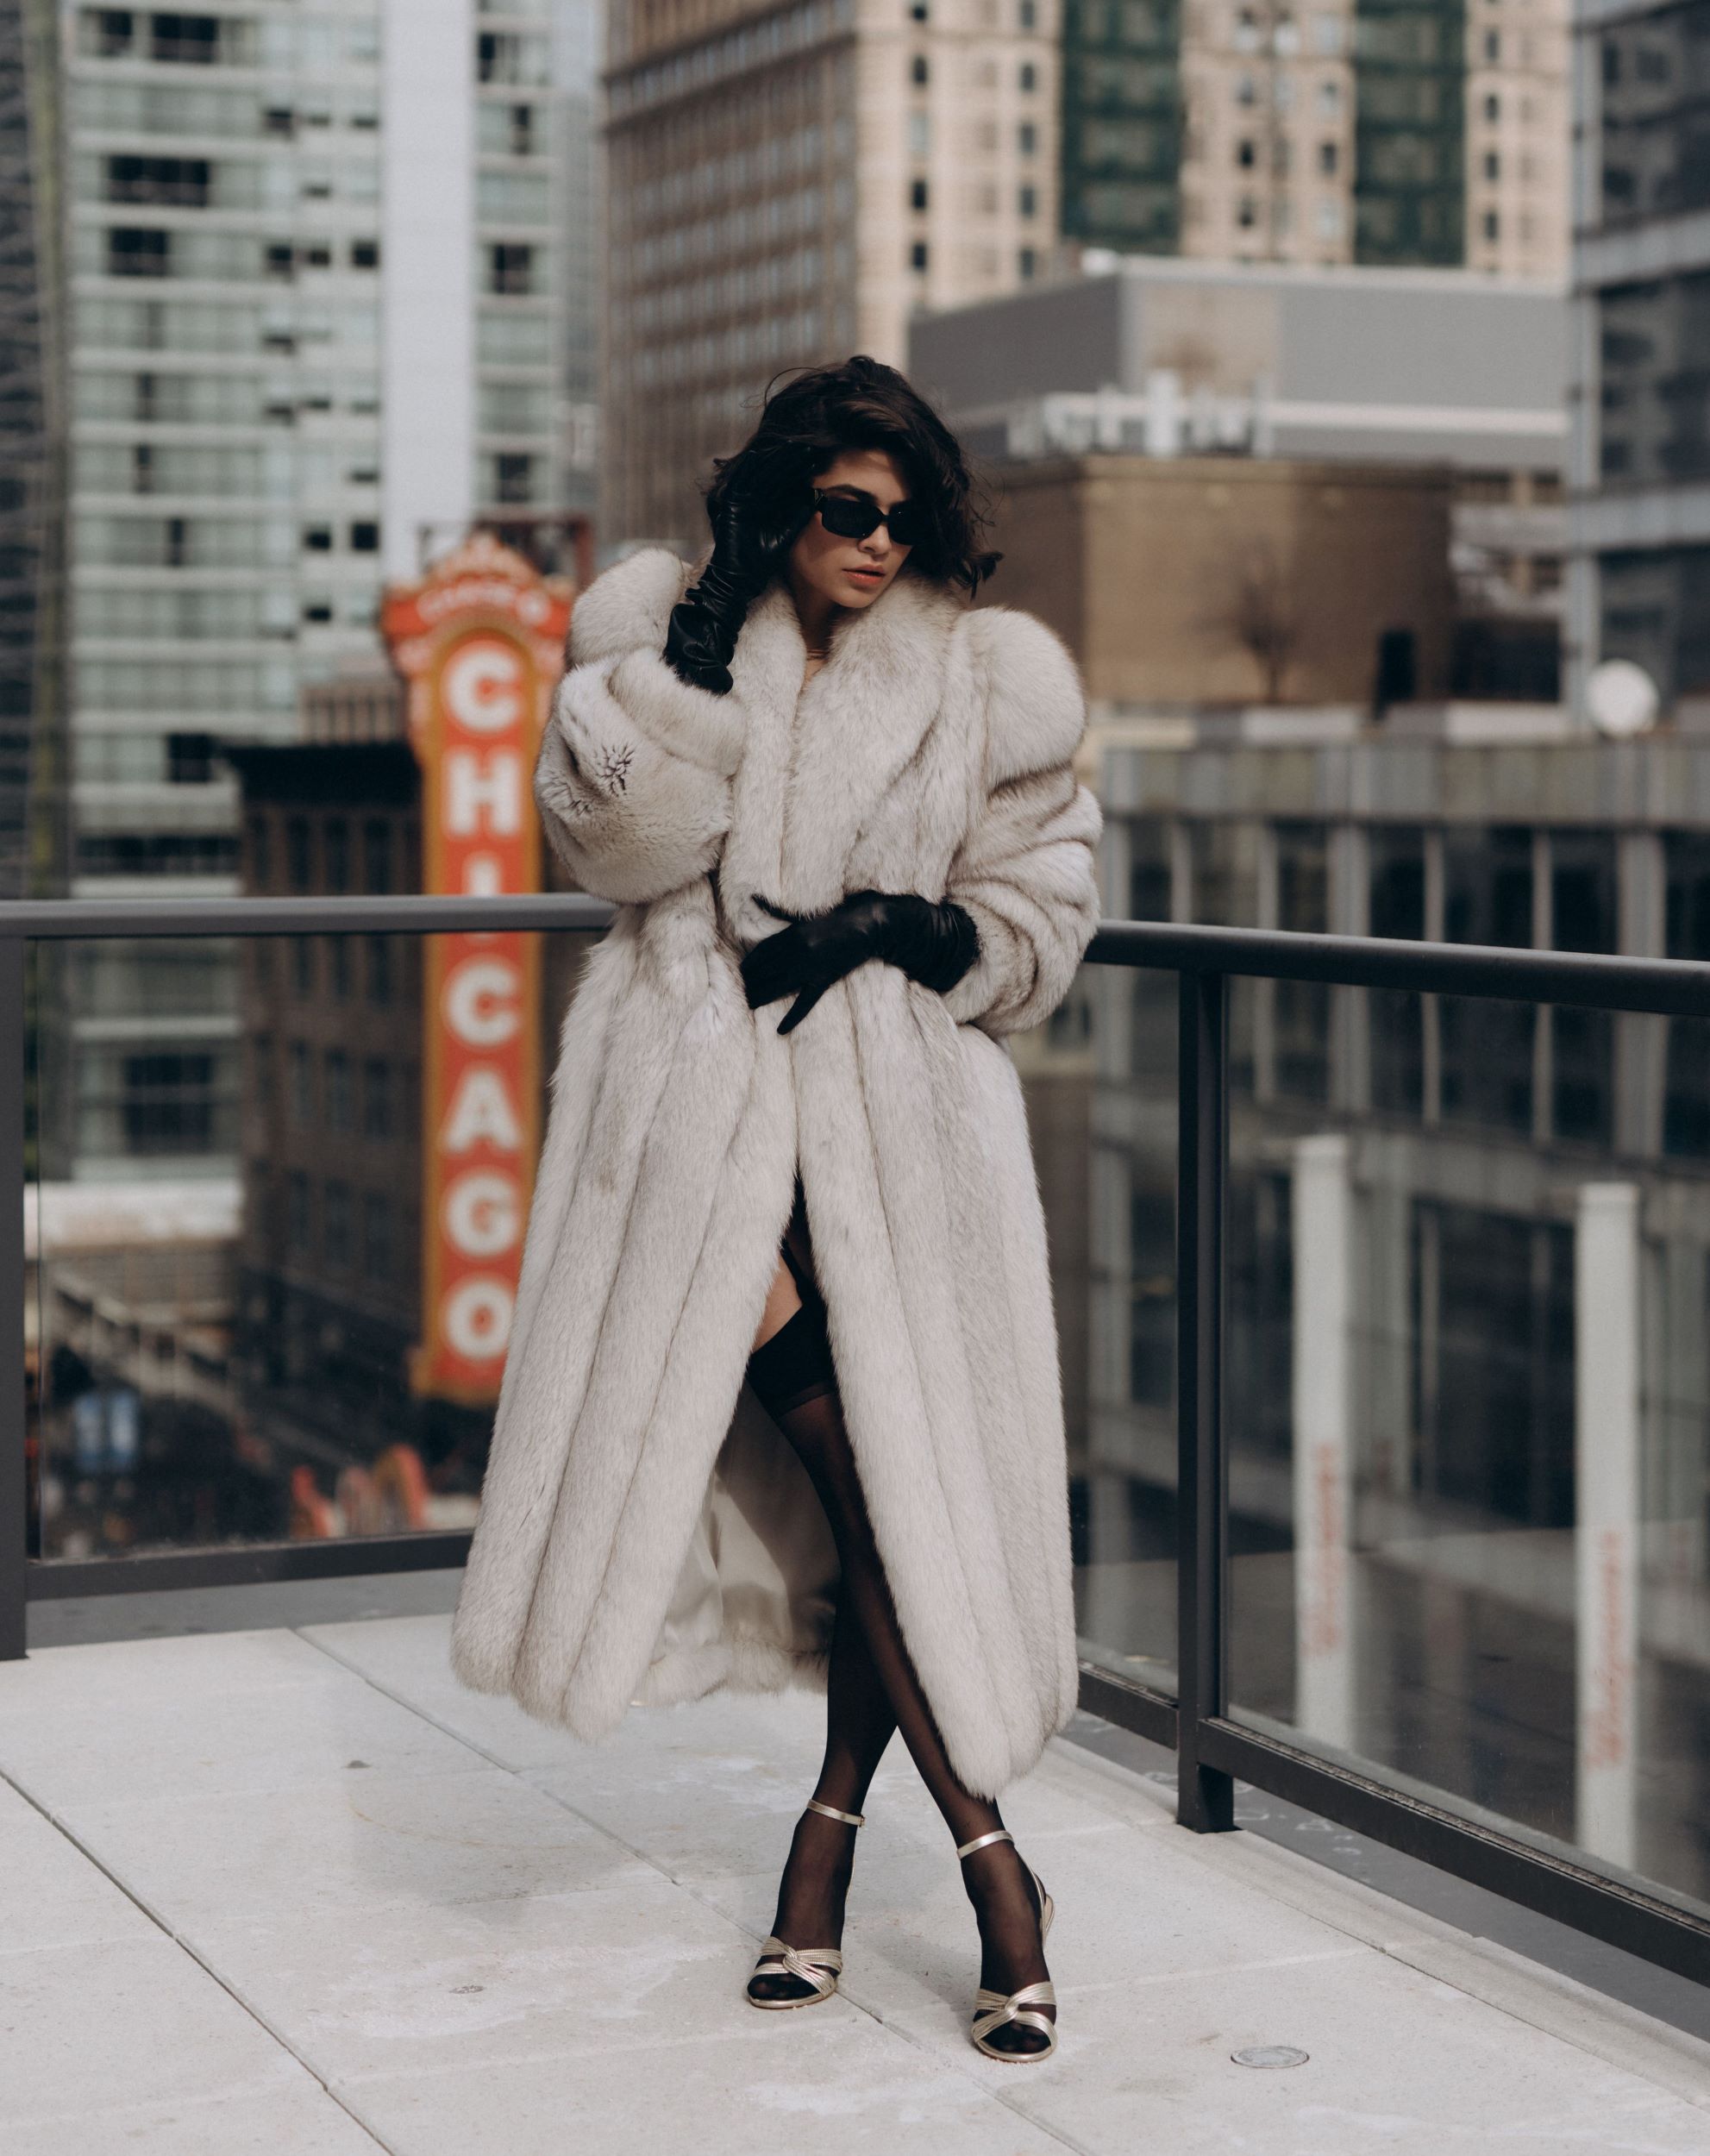 Fashionable woman standing atop a building with a luscious white fur coat